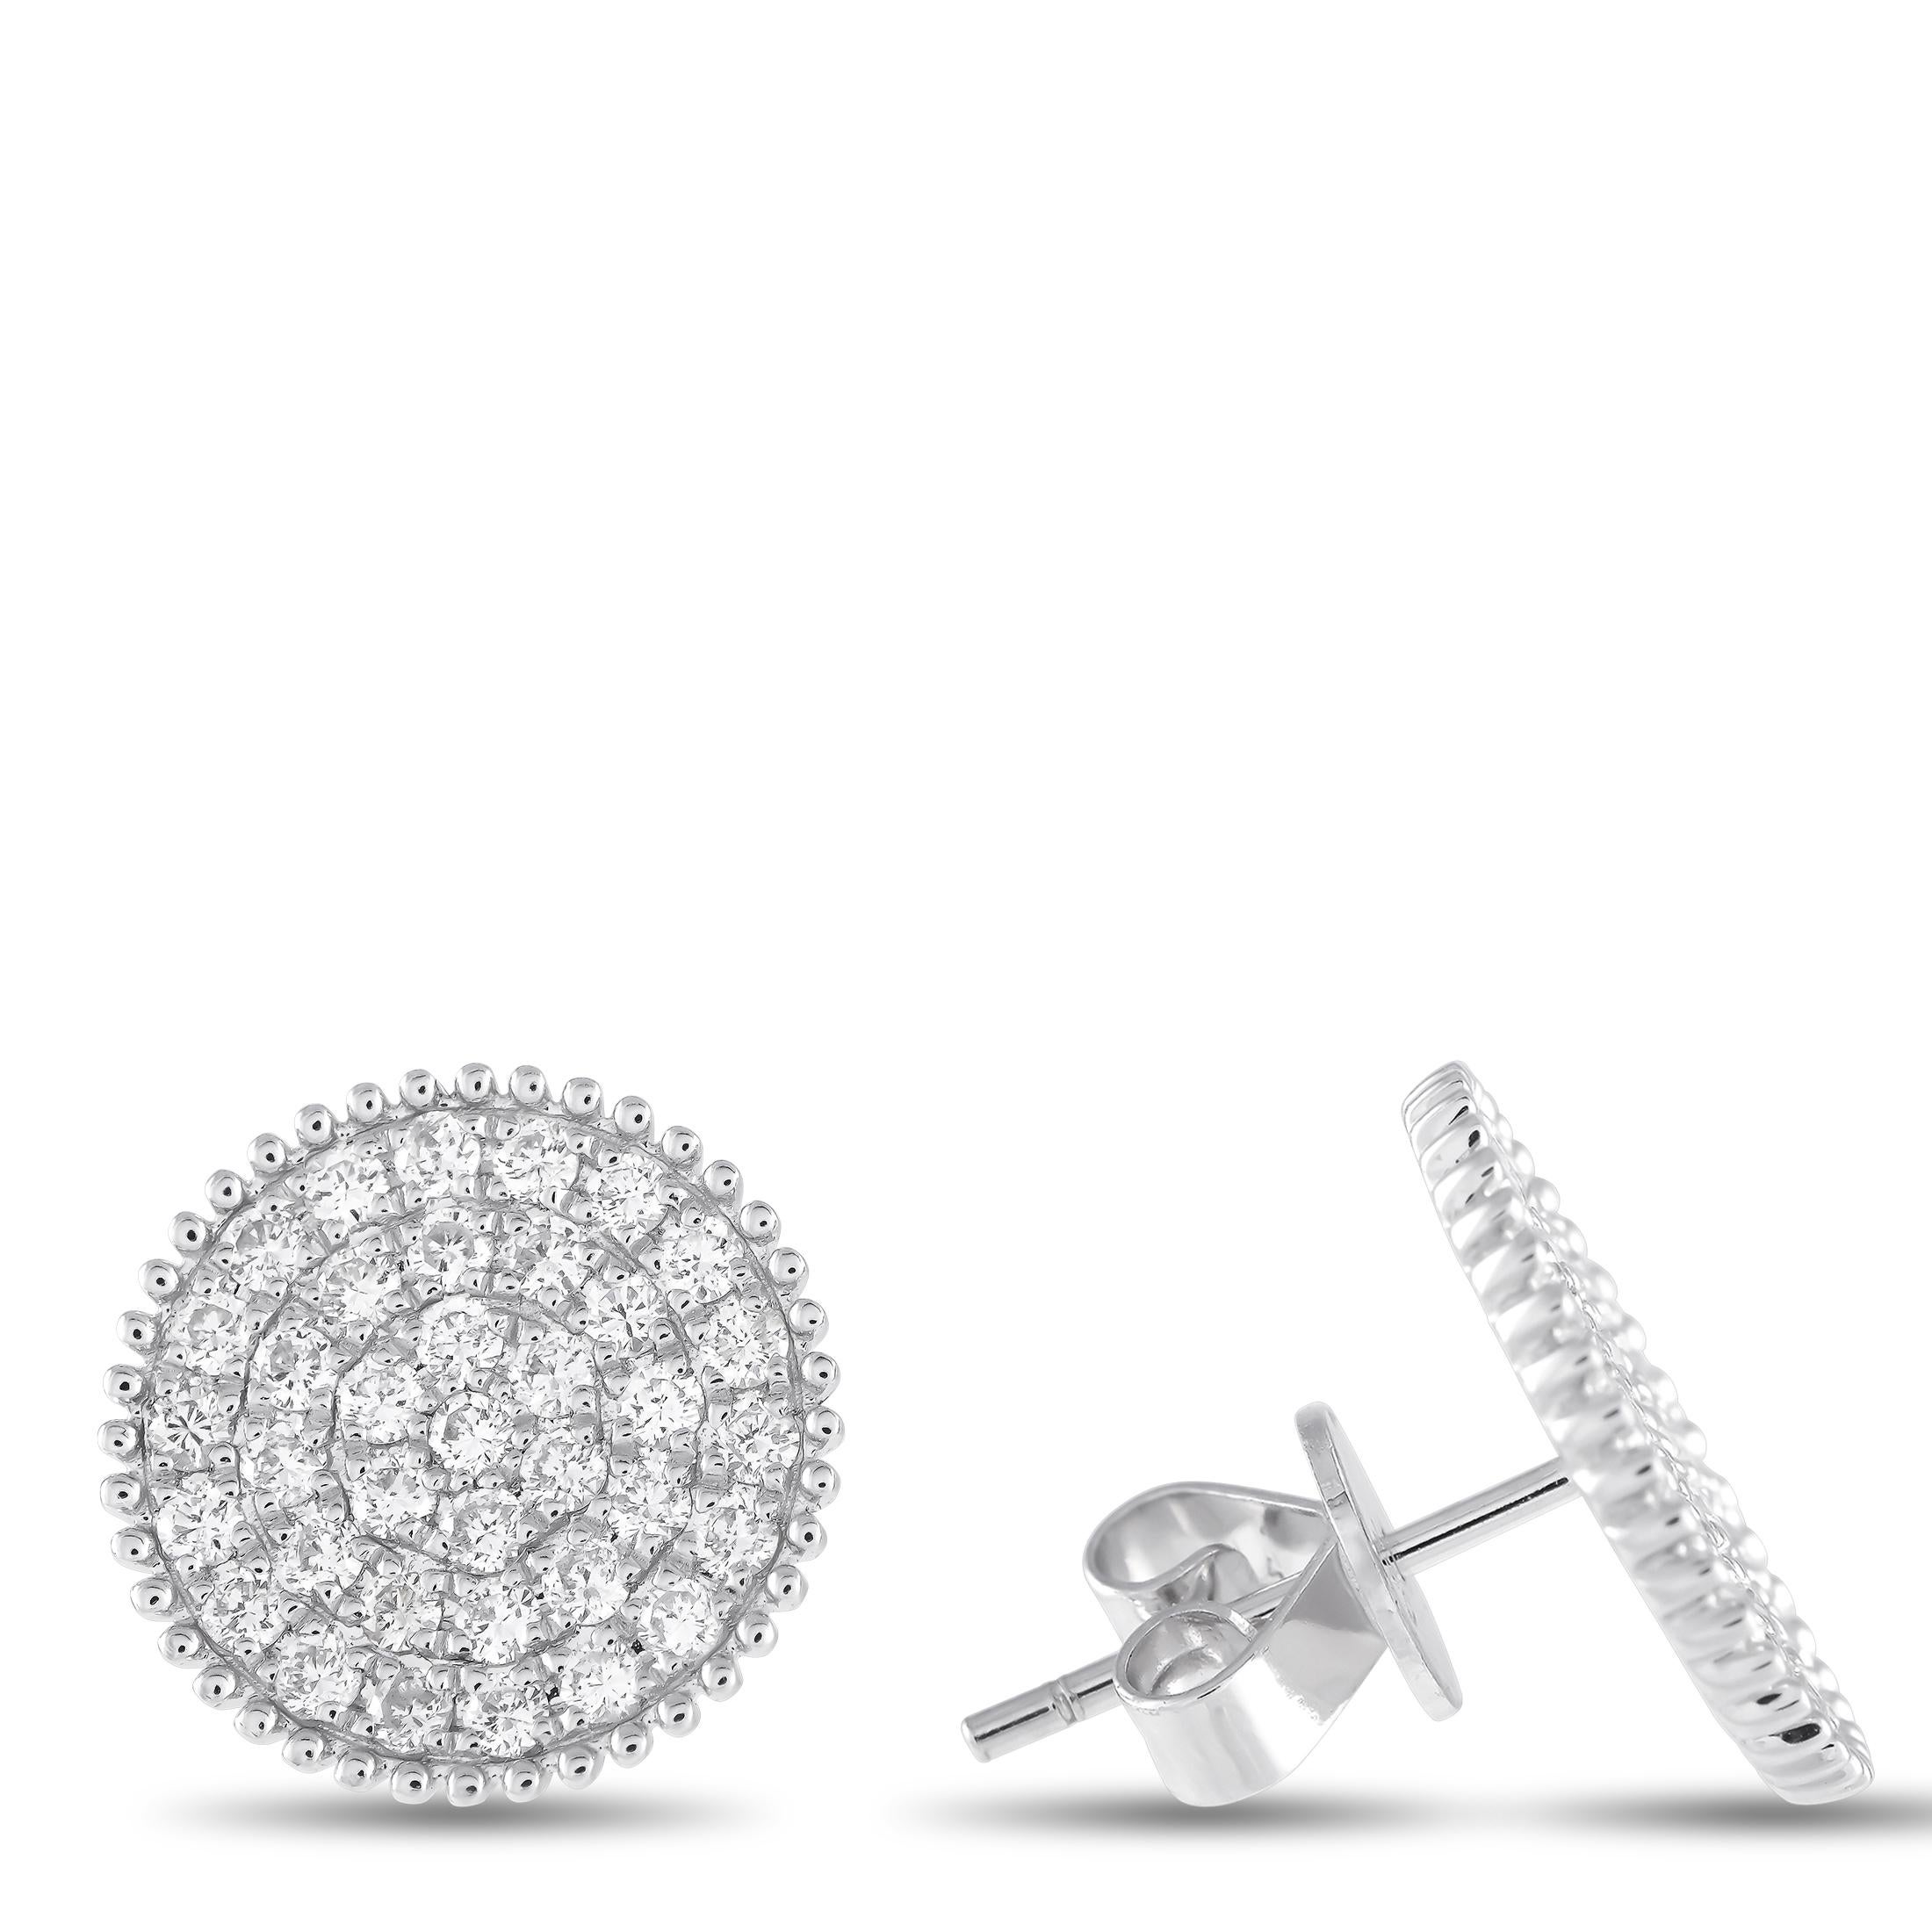 These circular earrings will add a touch of luxury to absolutely any ensemble. Crafted from 18K White Gold, the perimeter of the design is elevated by beadwork while the interior is covered in sparkling Diamonds with a total weight of 1.30 carats.